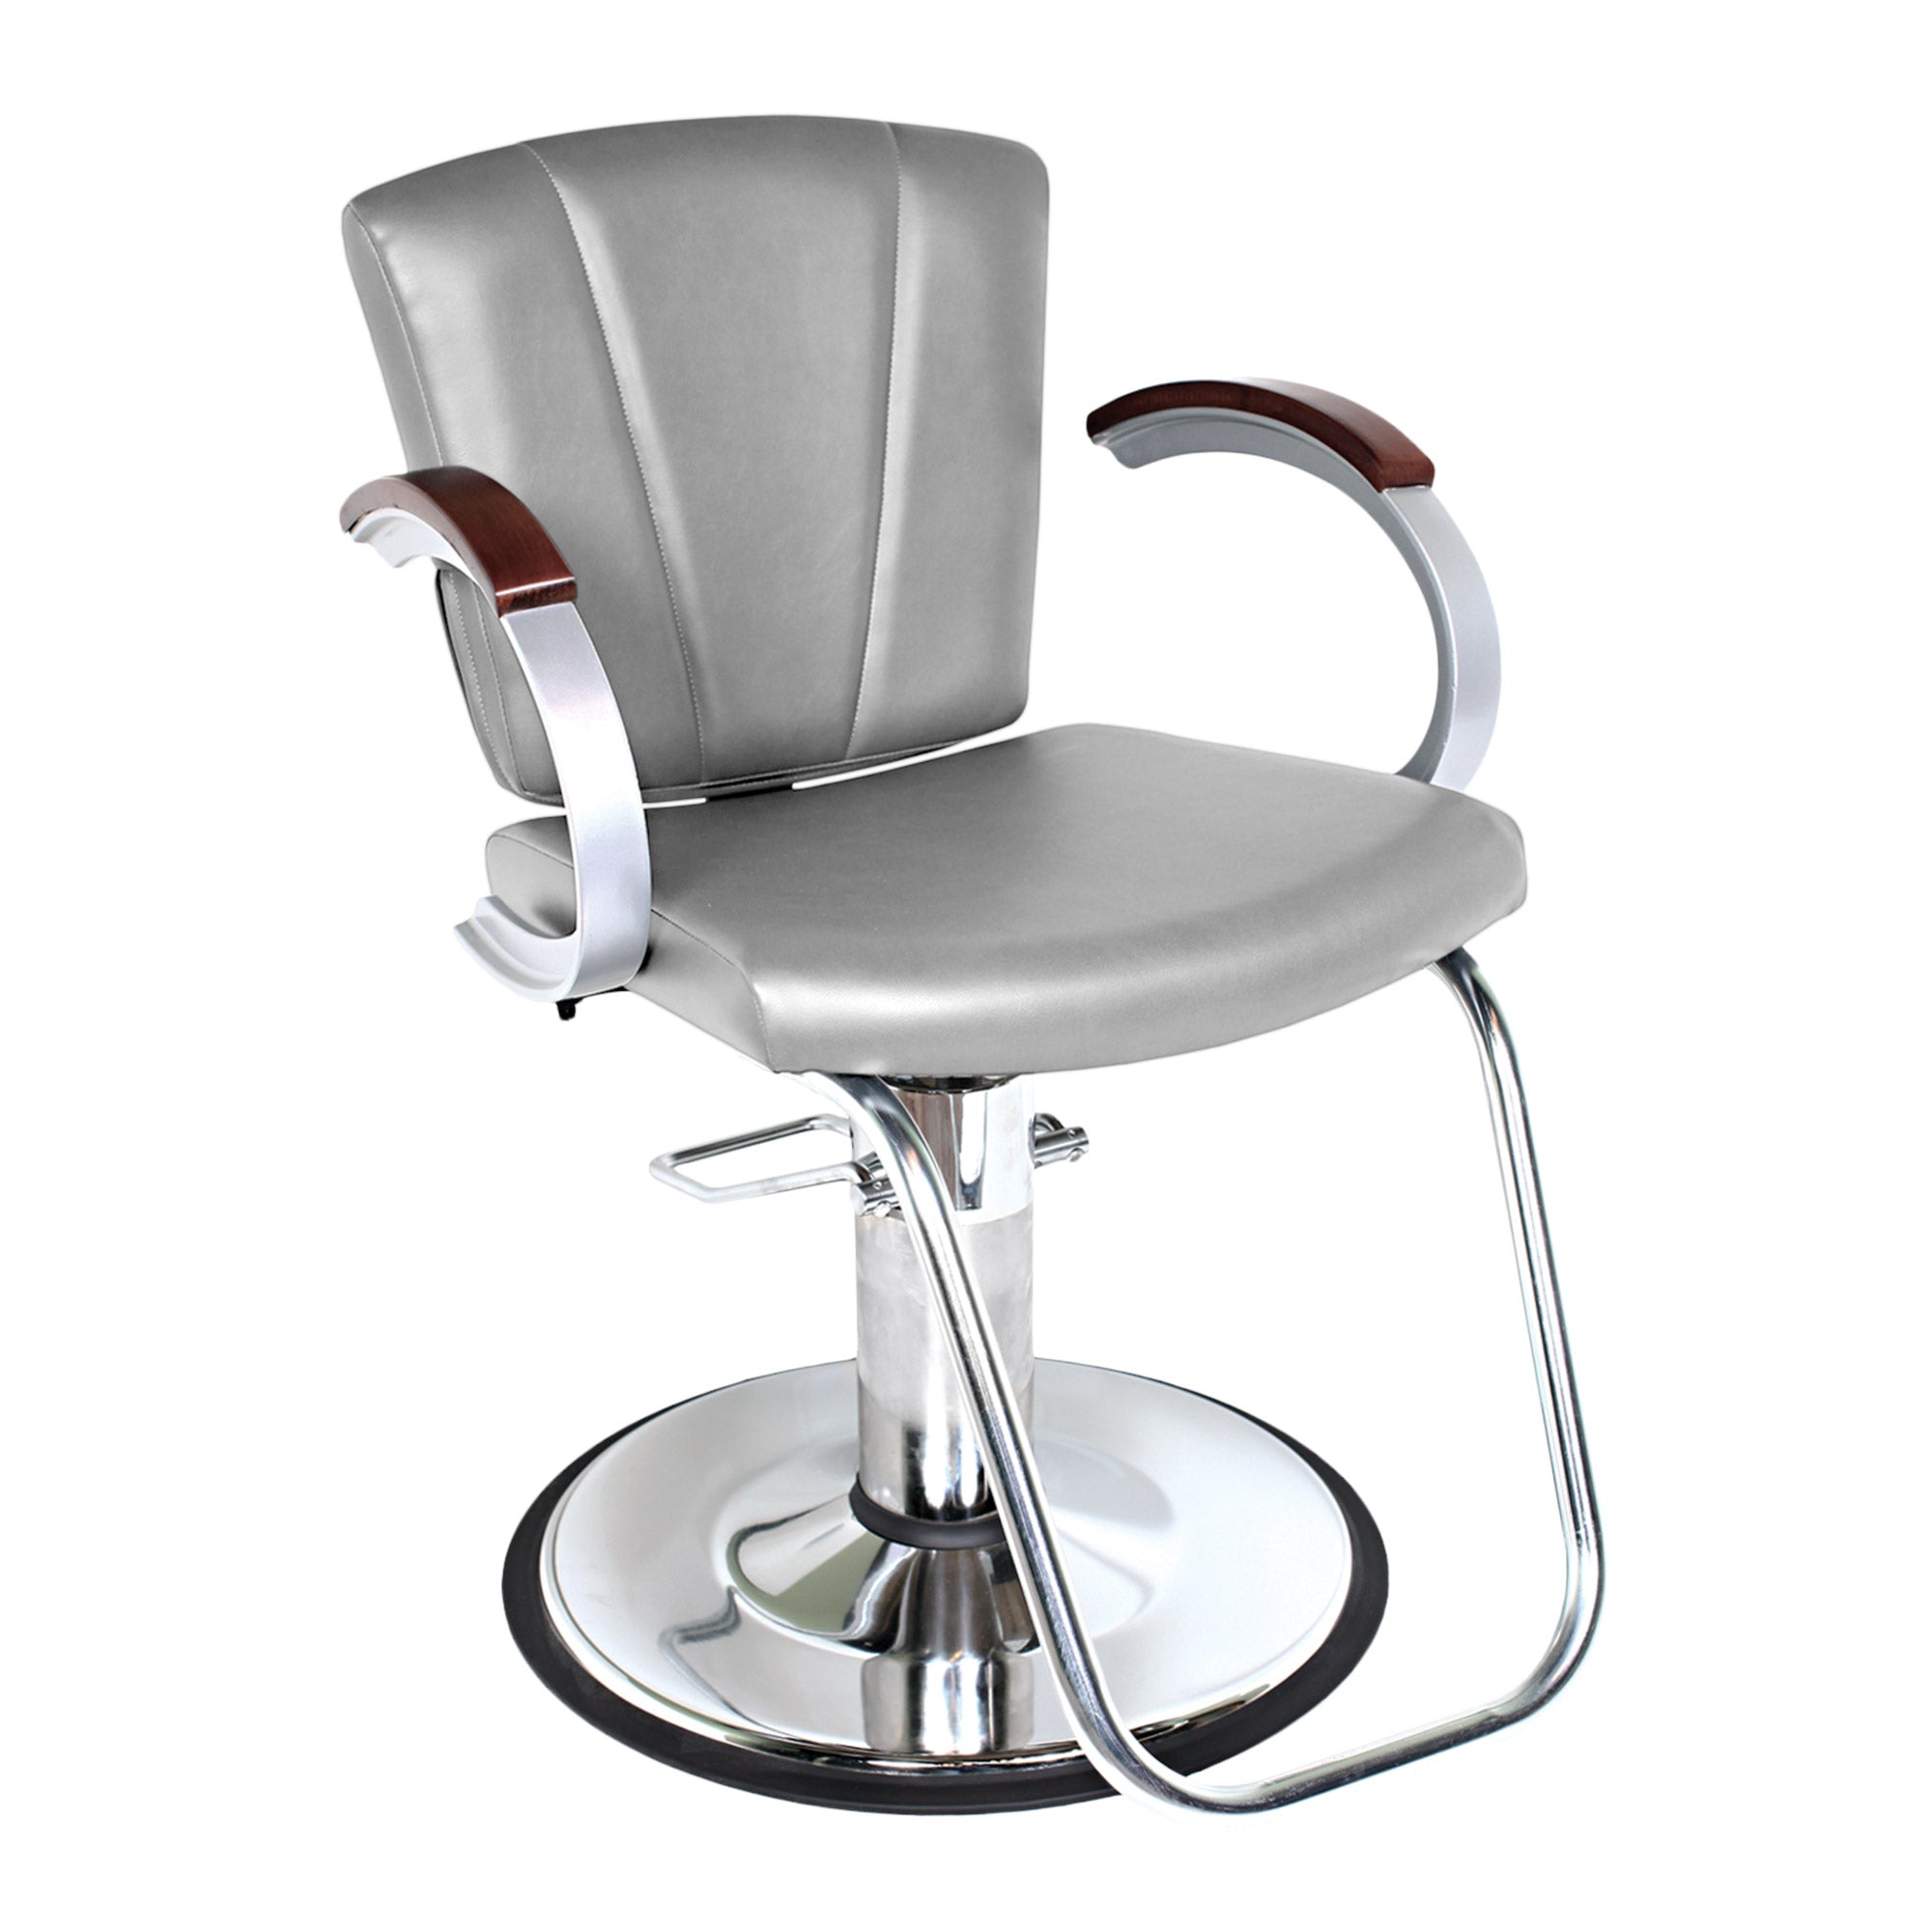 Vanelle SA Styling Chair - Collins